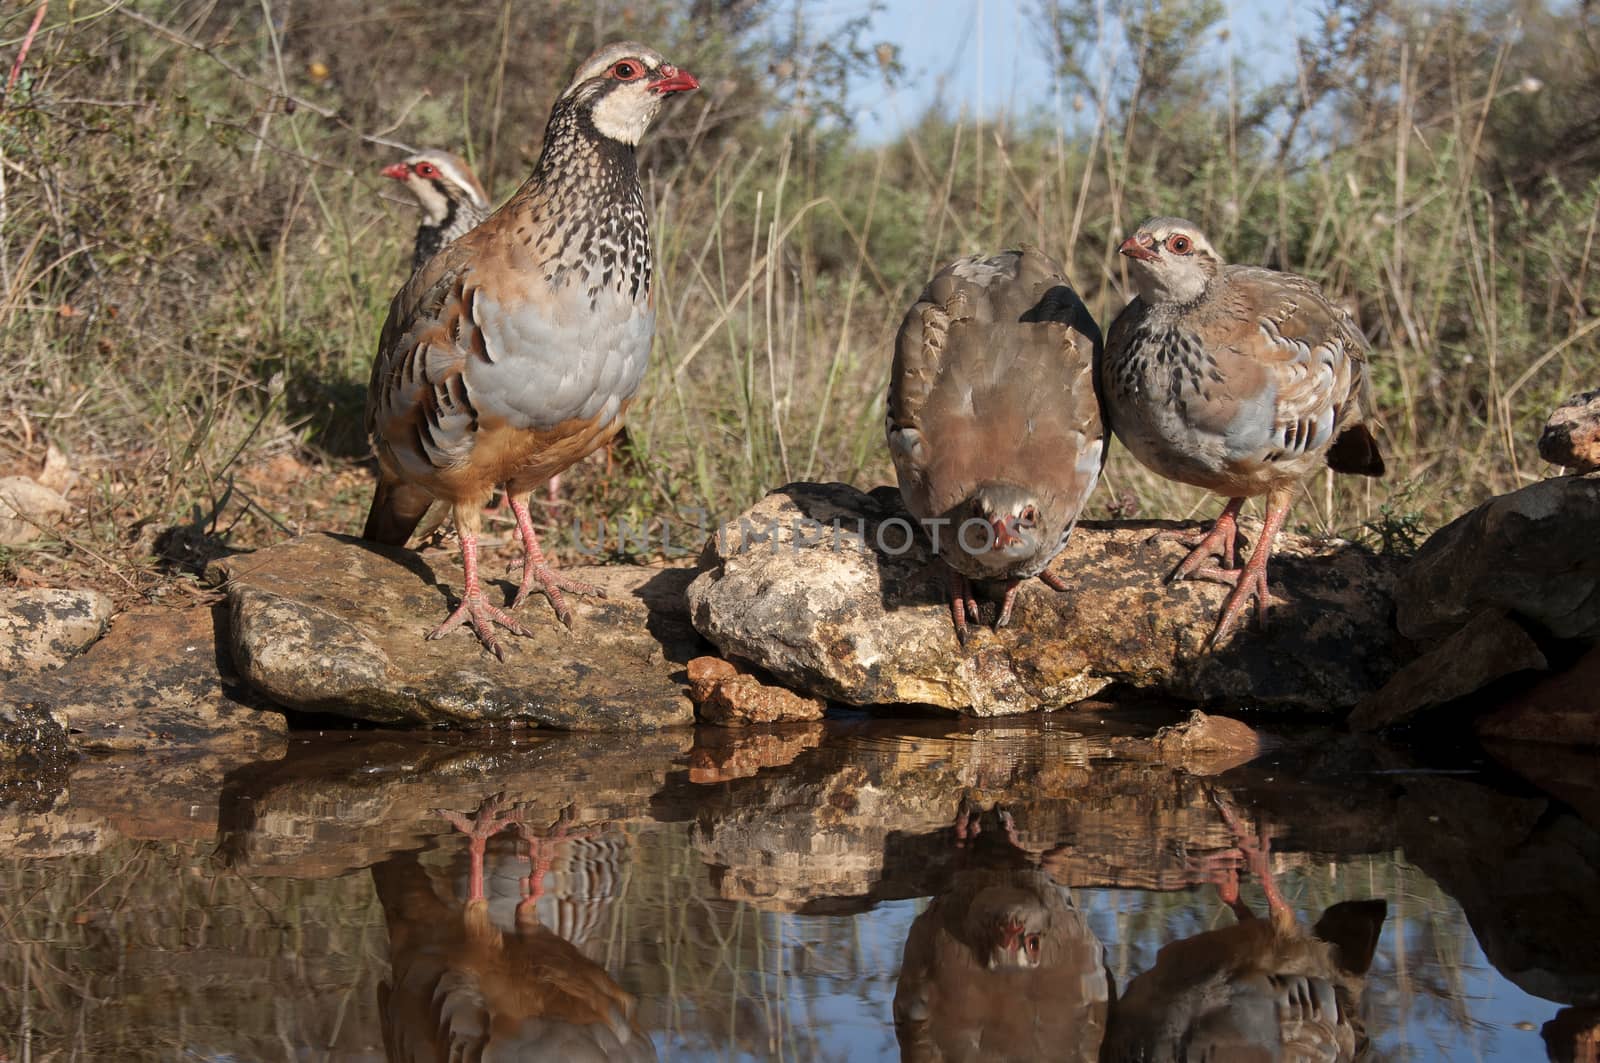 The red-legged, Alectoris rufa, family drinking water by jalonsohu@gmail.com